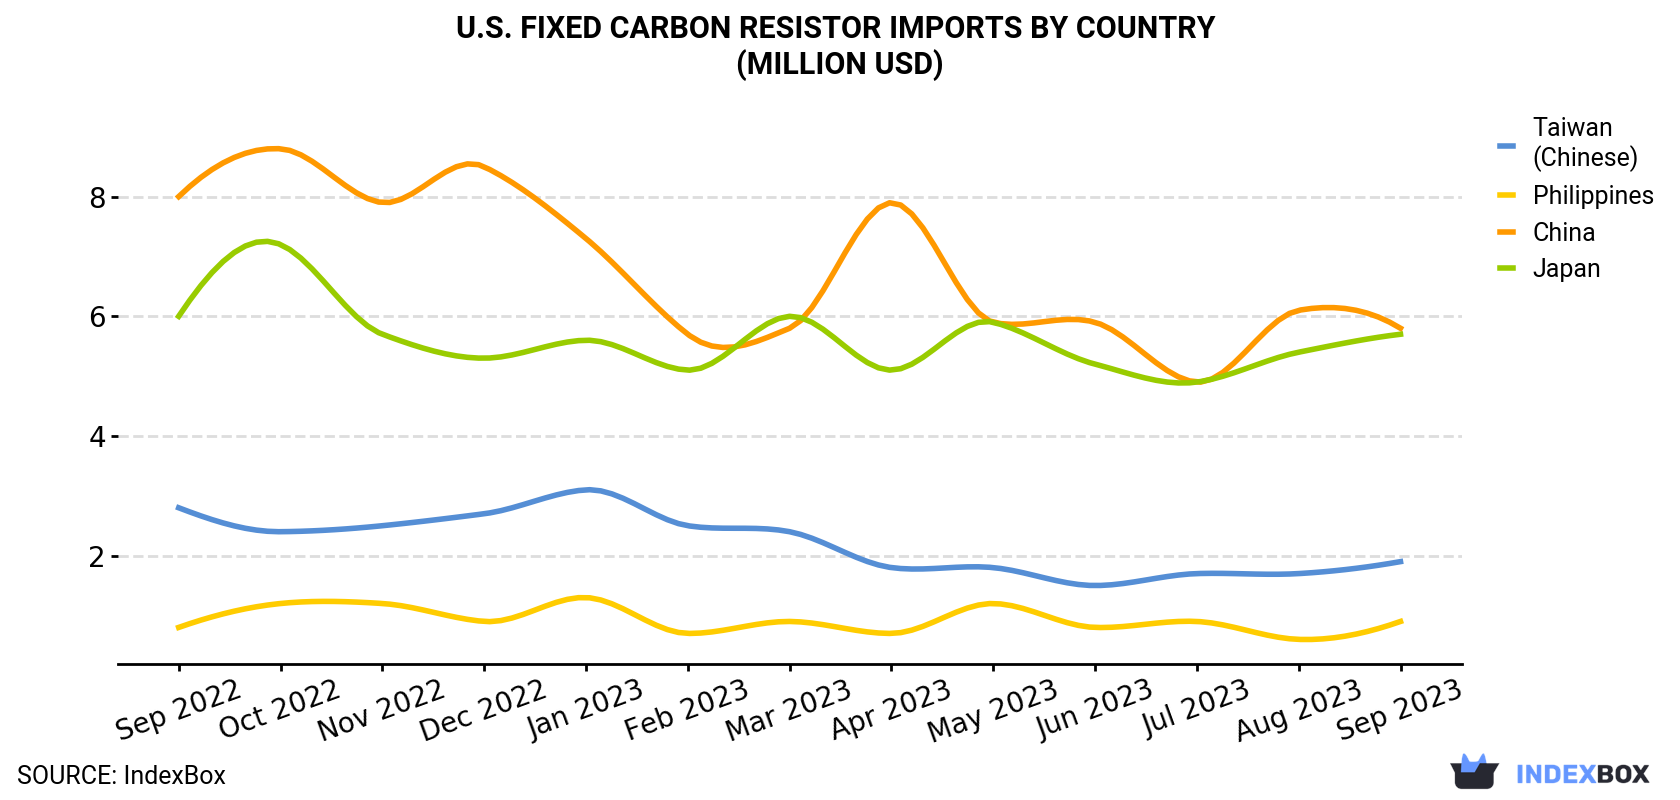 U.S. Fixed Carbon Resistor Imports By Country (Million USD)